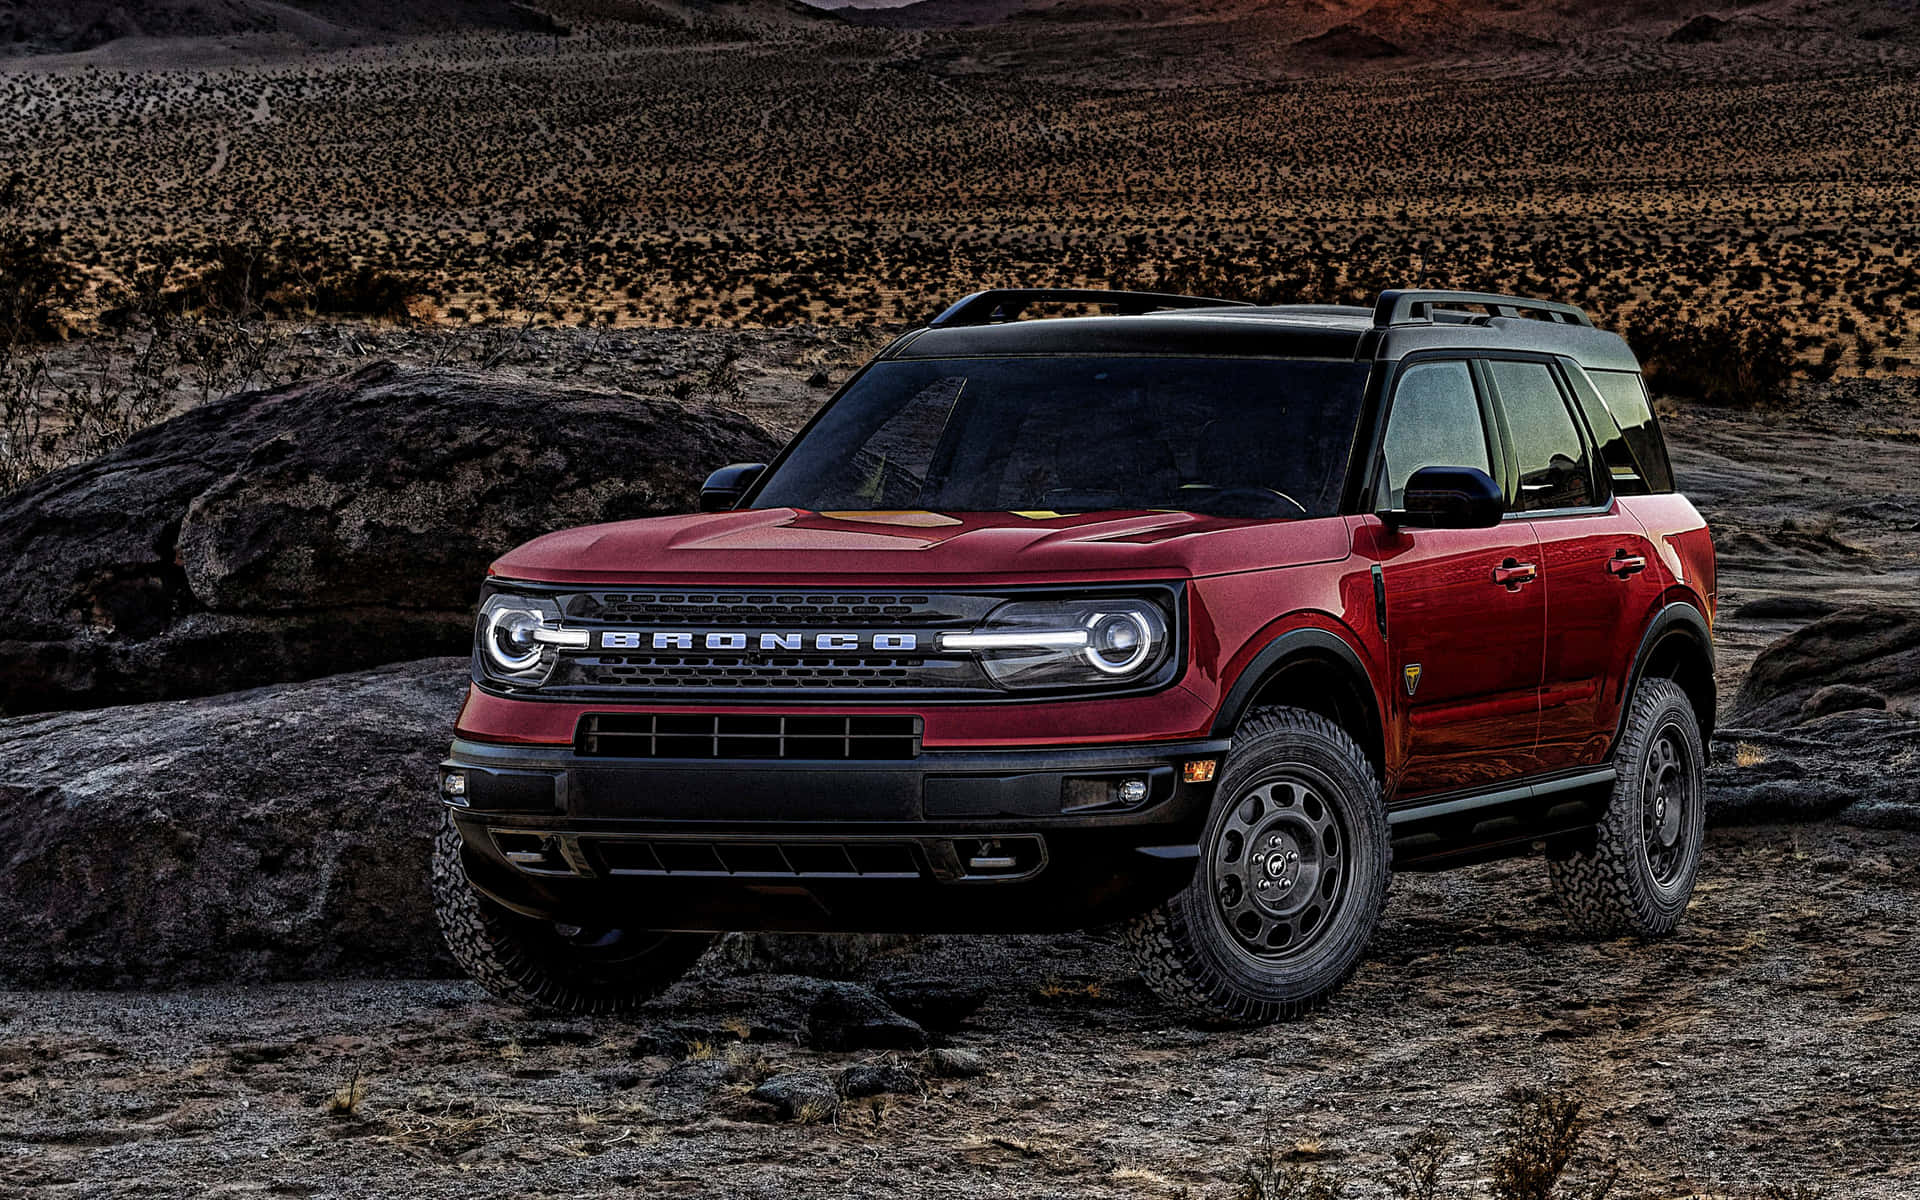 The 2020 Ford Bronco Is Parked In The Desert